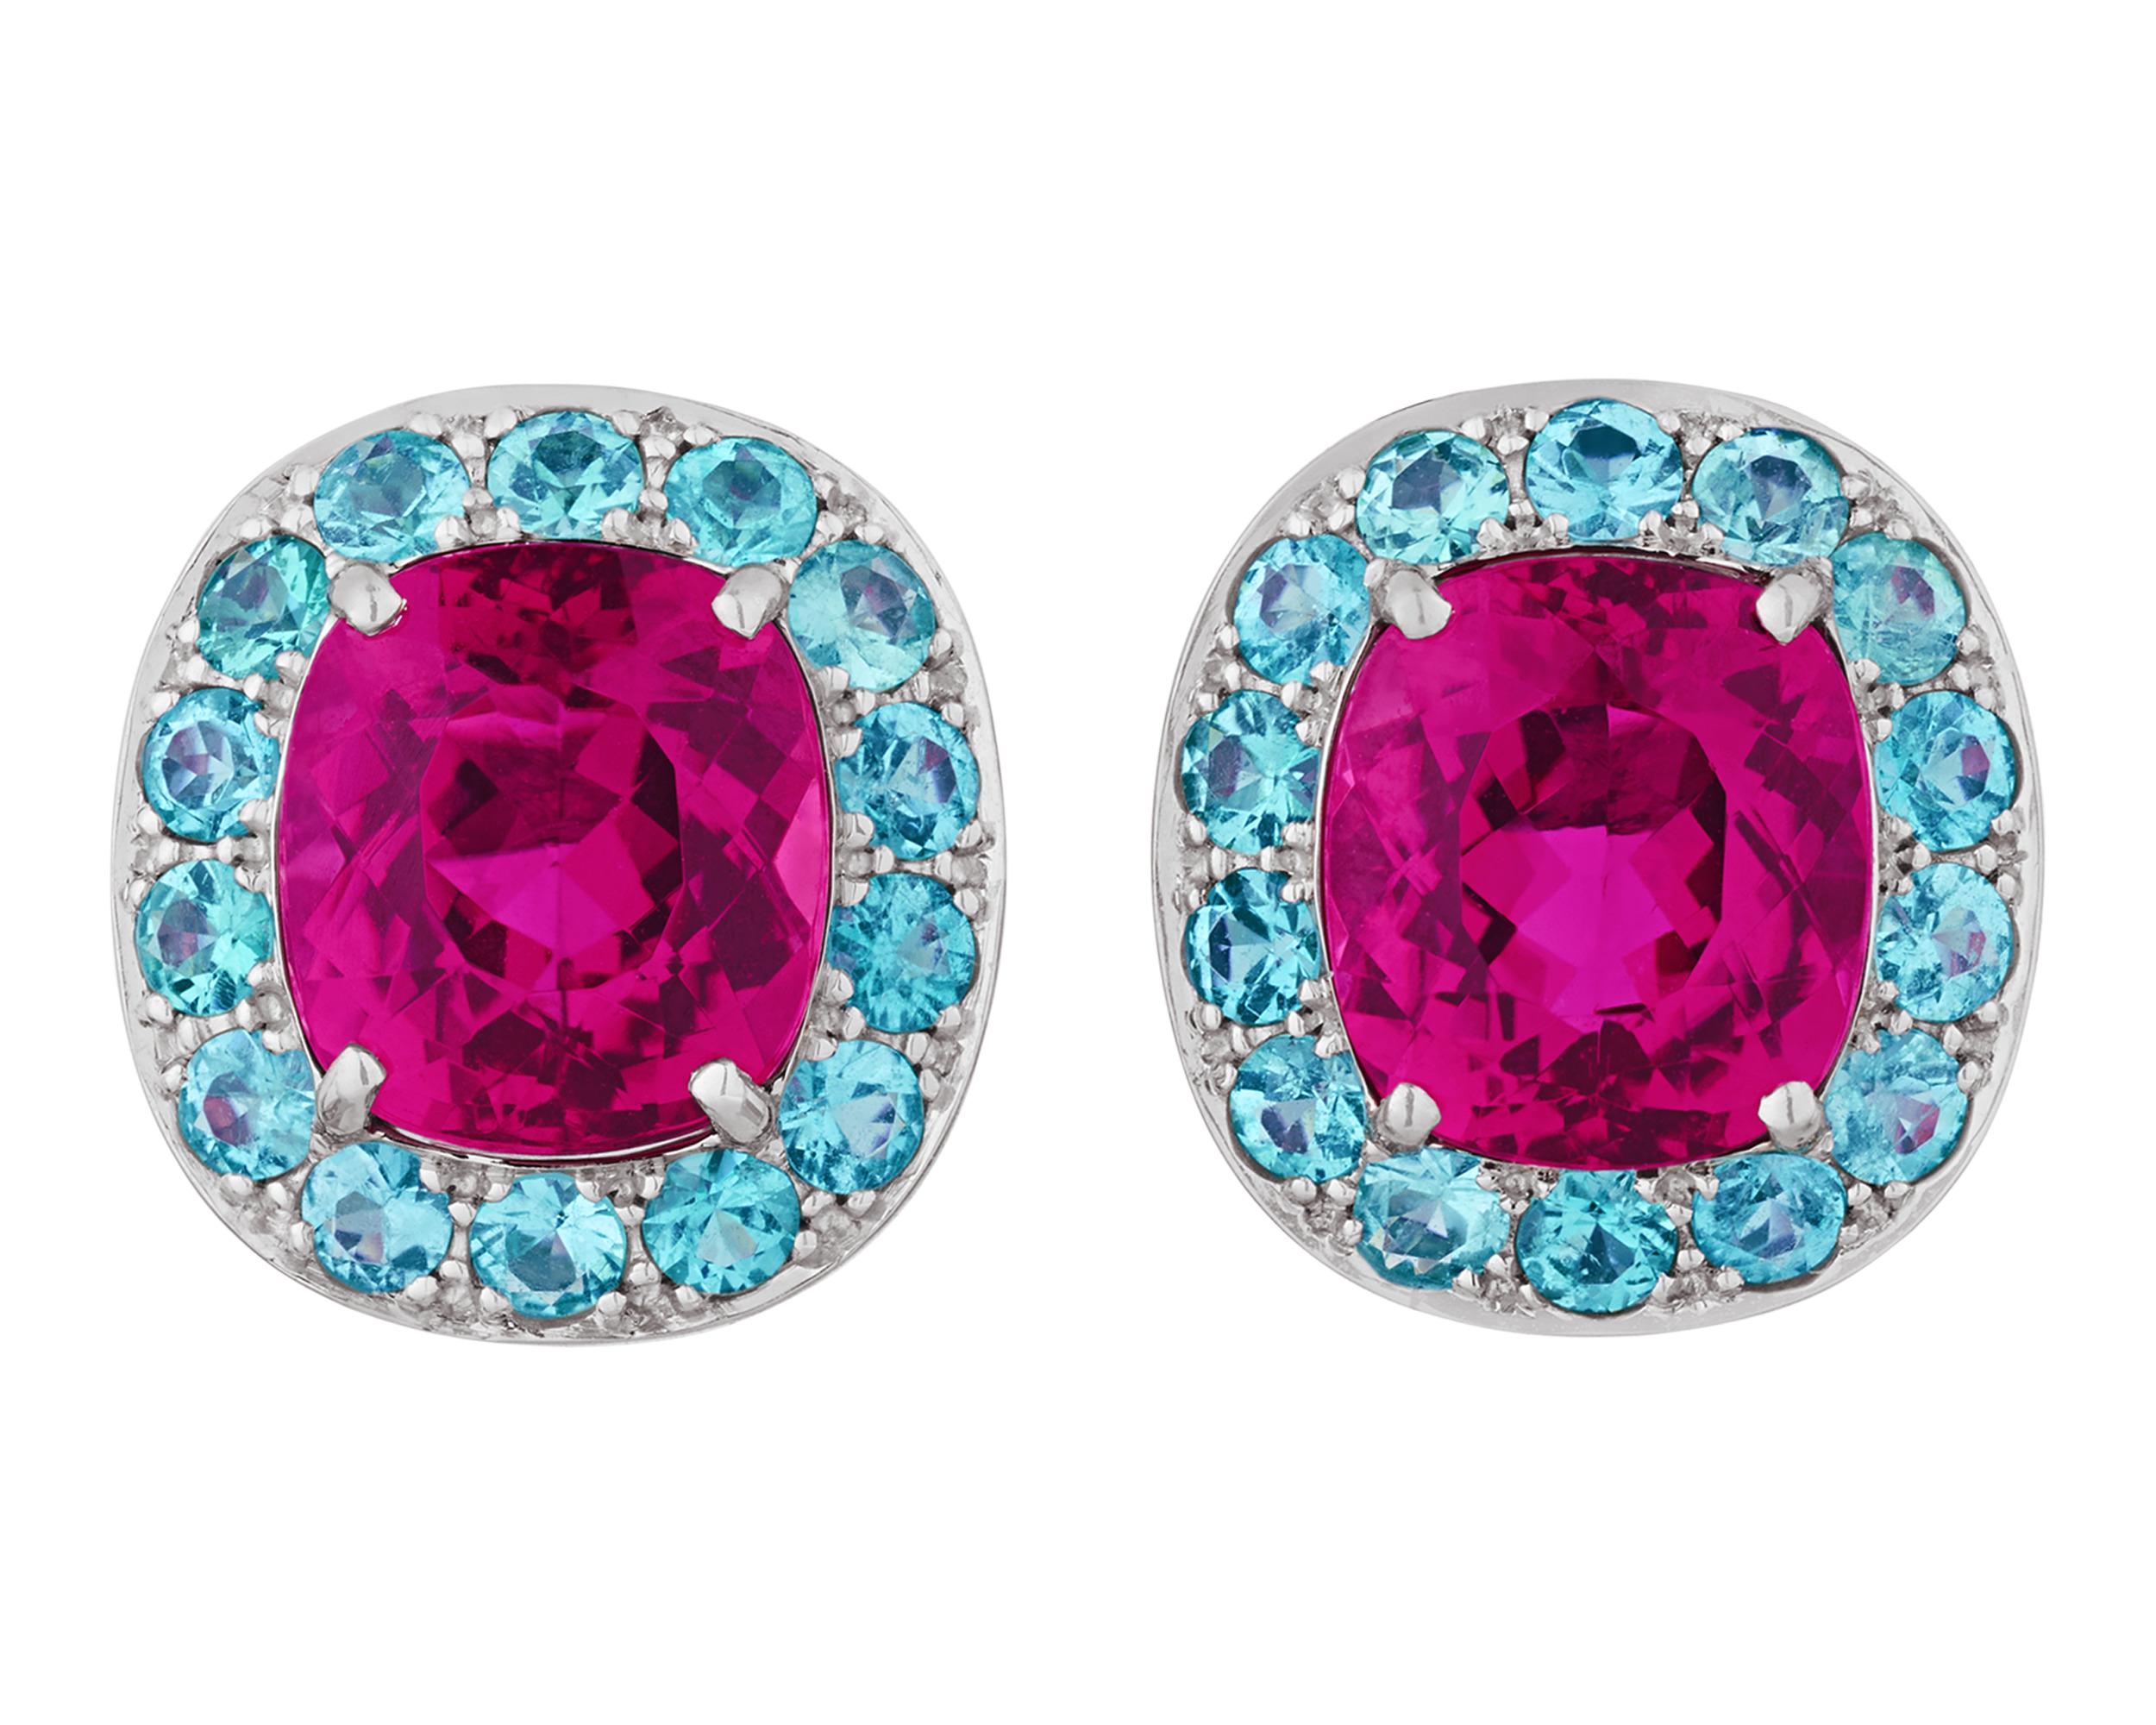 Cushion Cut Rubellite Earrings With Paraiba Accents By Oscar Heyman, 4.55 Carats For Sale